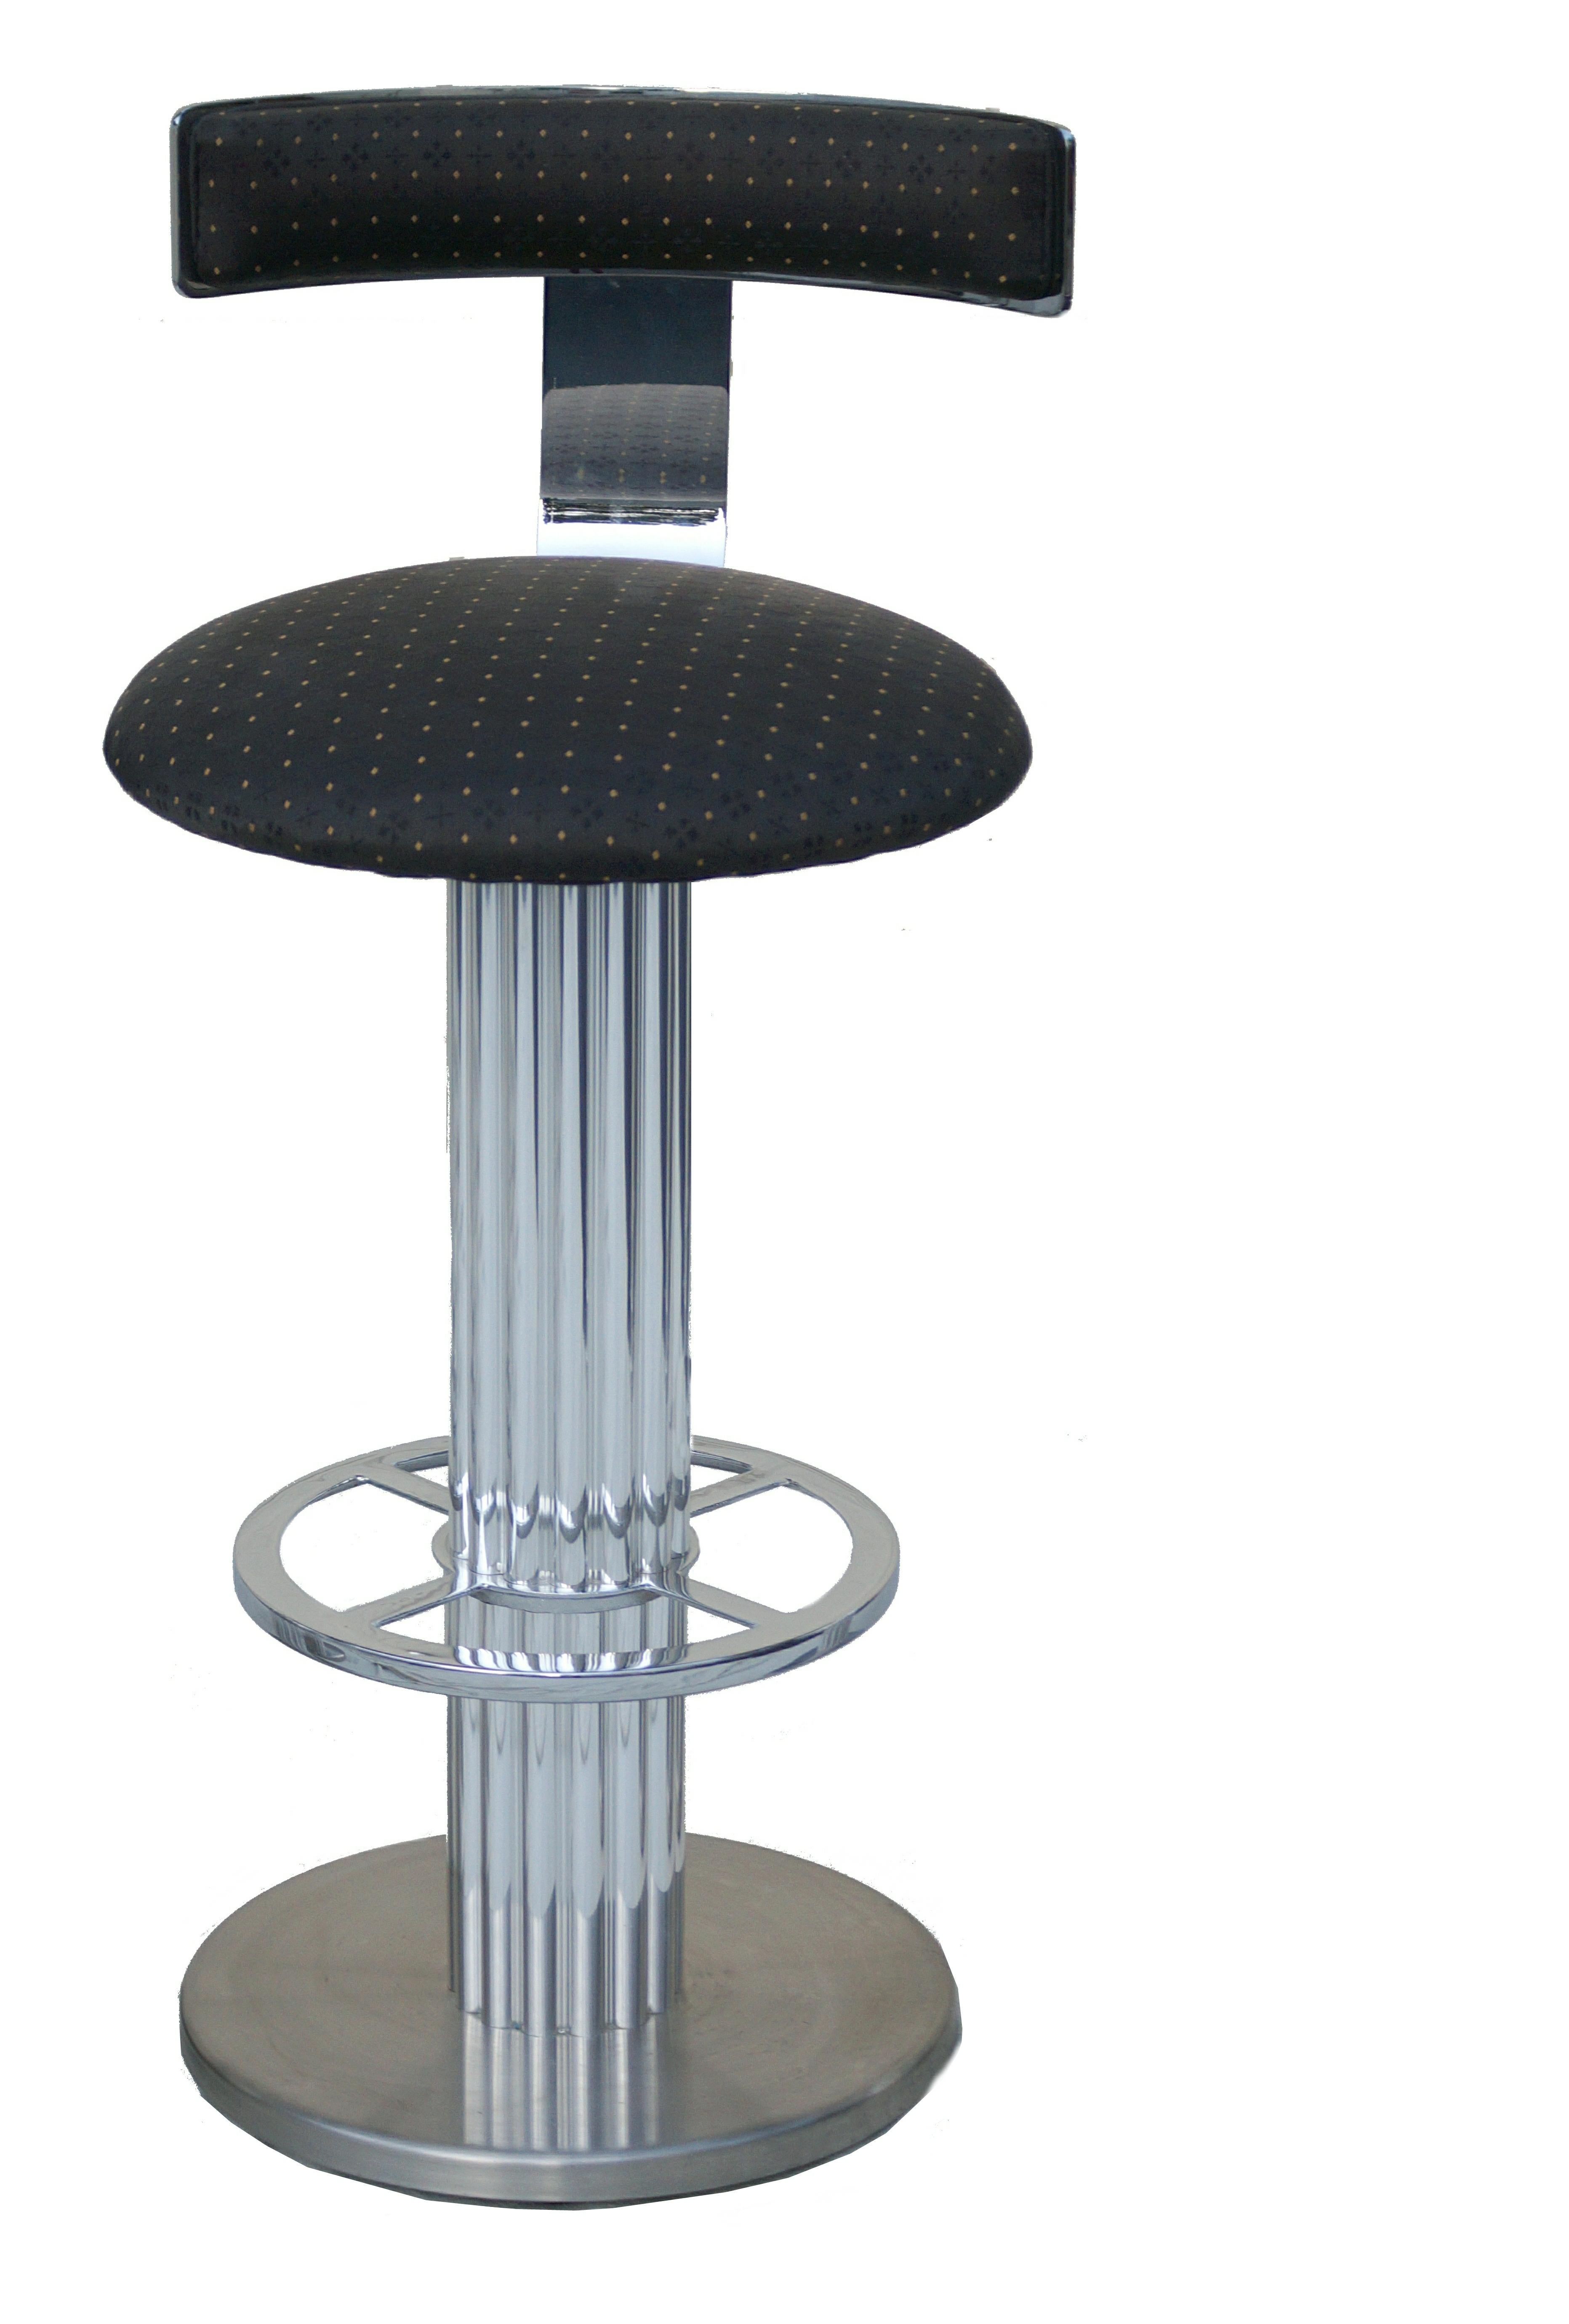 American 4 Design Designs For Leisure Chrome Steel Bar Counter Stools